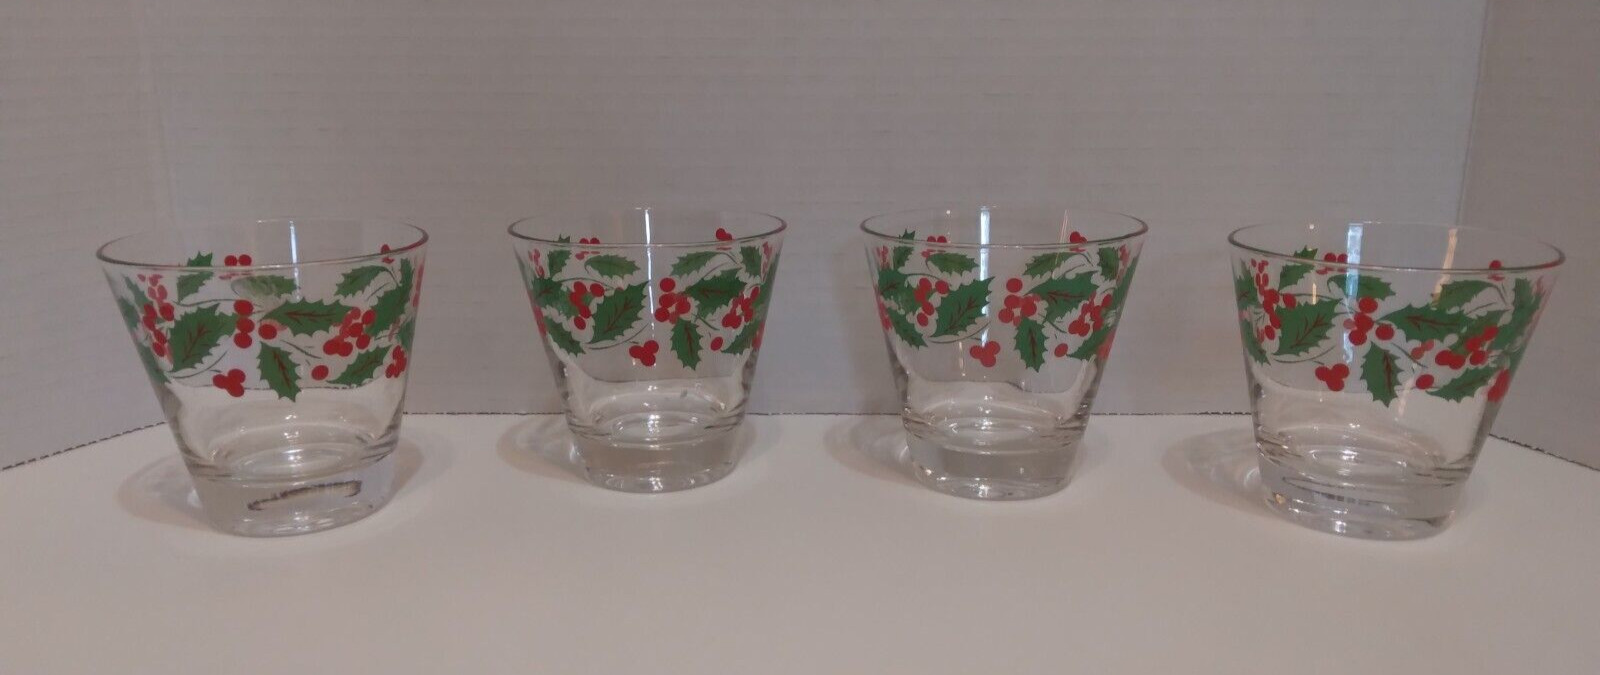 Vintage 8 ounce Holly Berry Christmas Low Ball Tumblers Set of 4